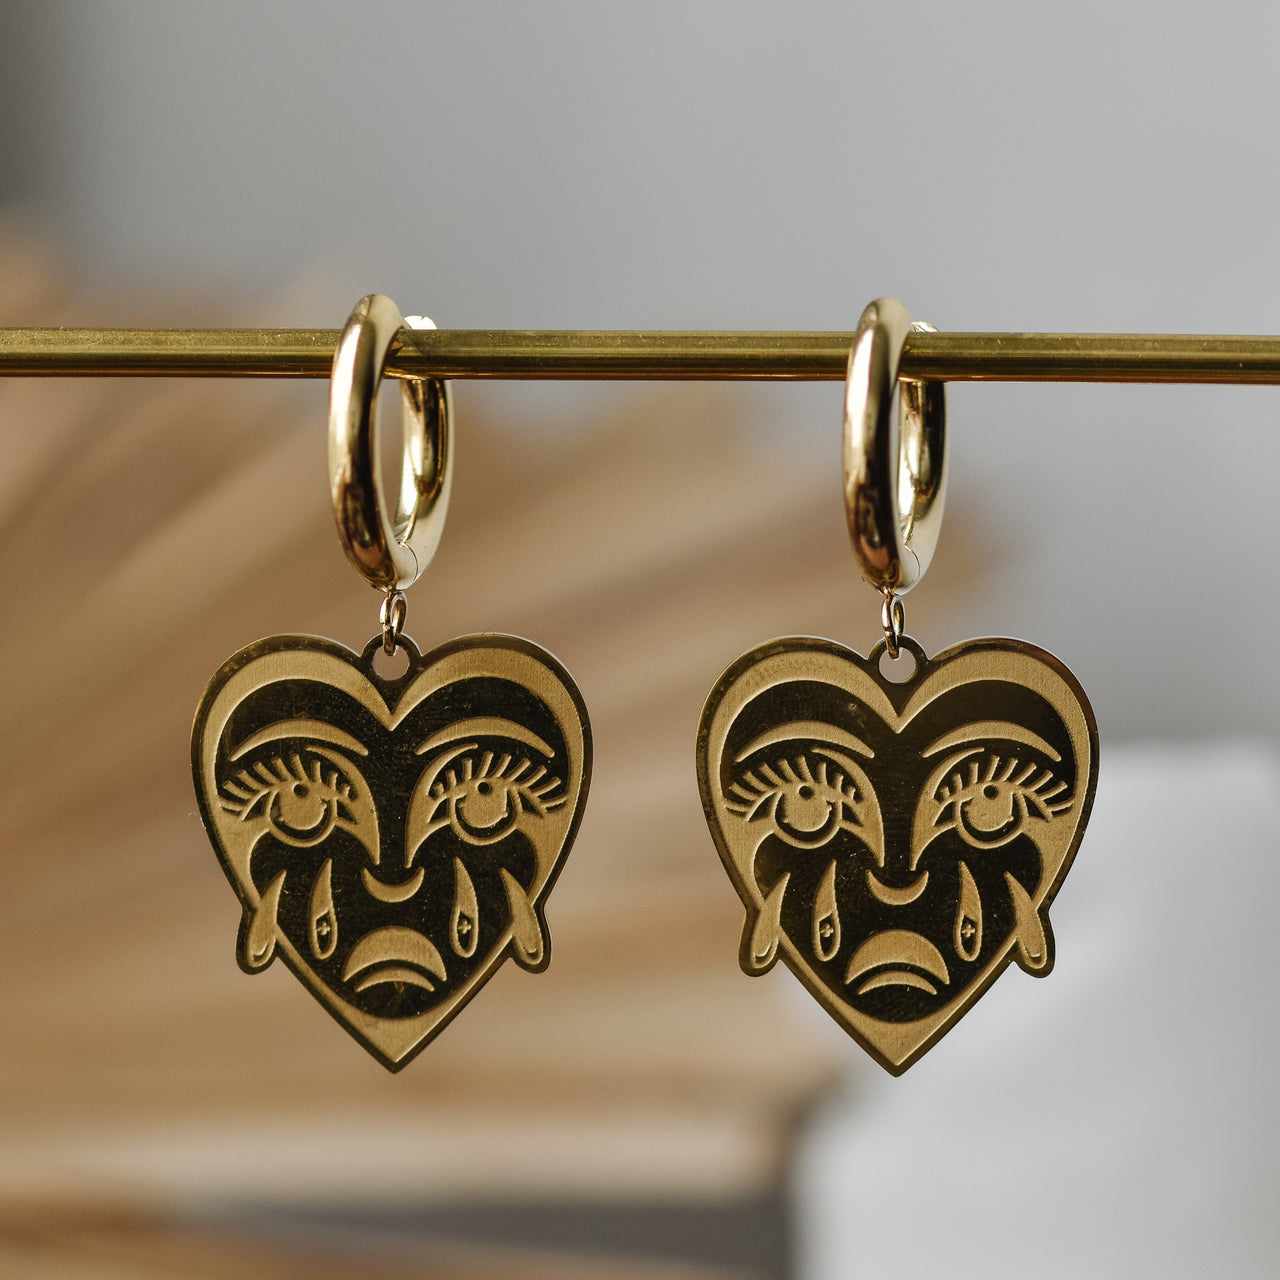 Crying Heart Earrings - Gold